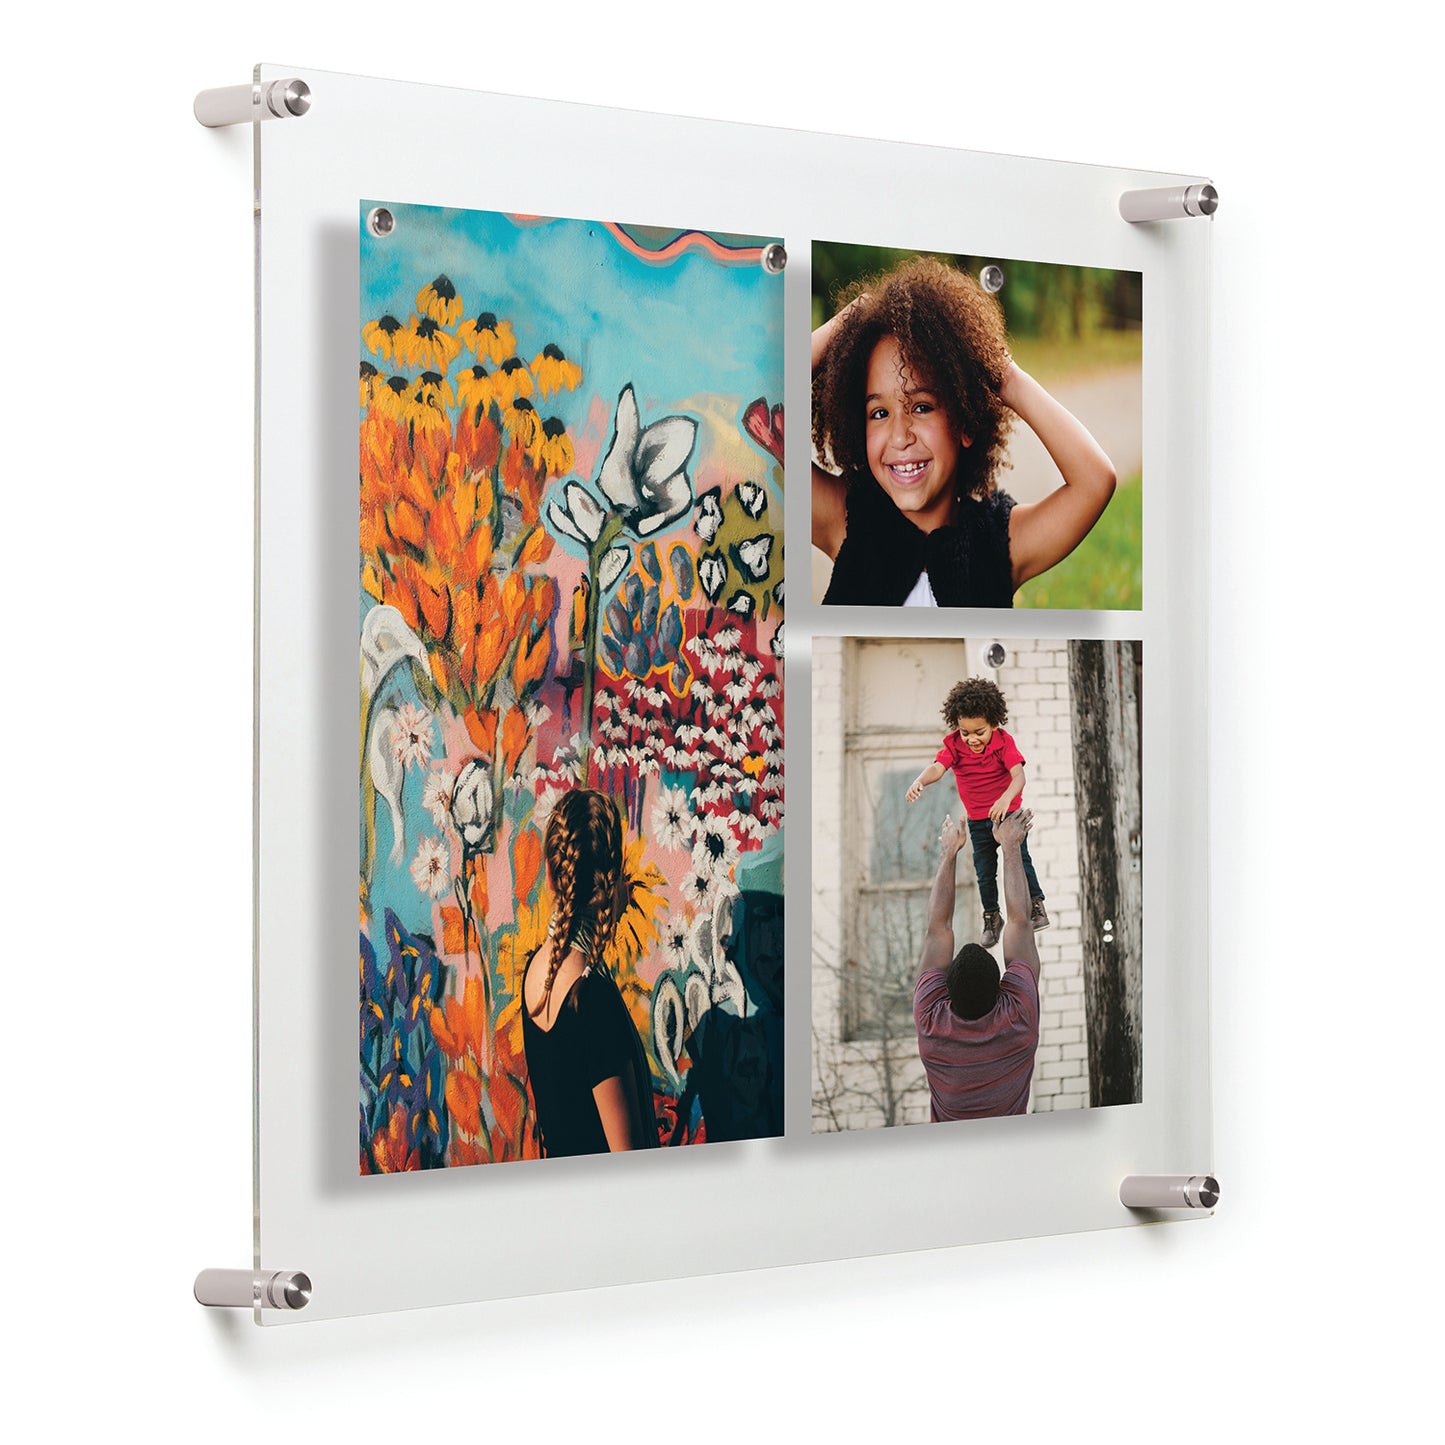 19" x 23" Easy Change Float Frame + Magnets for 16" x 20" Art [Silver or Gold]